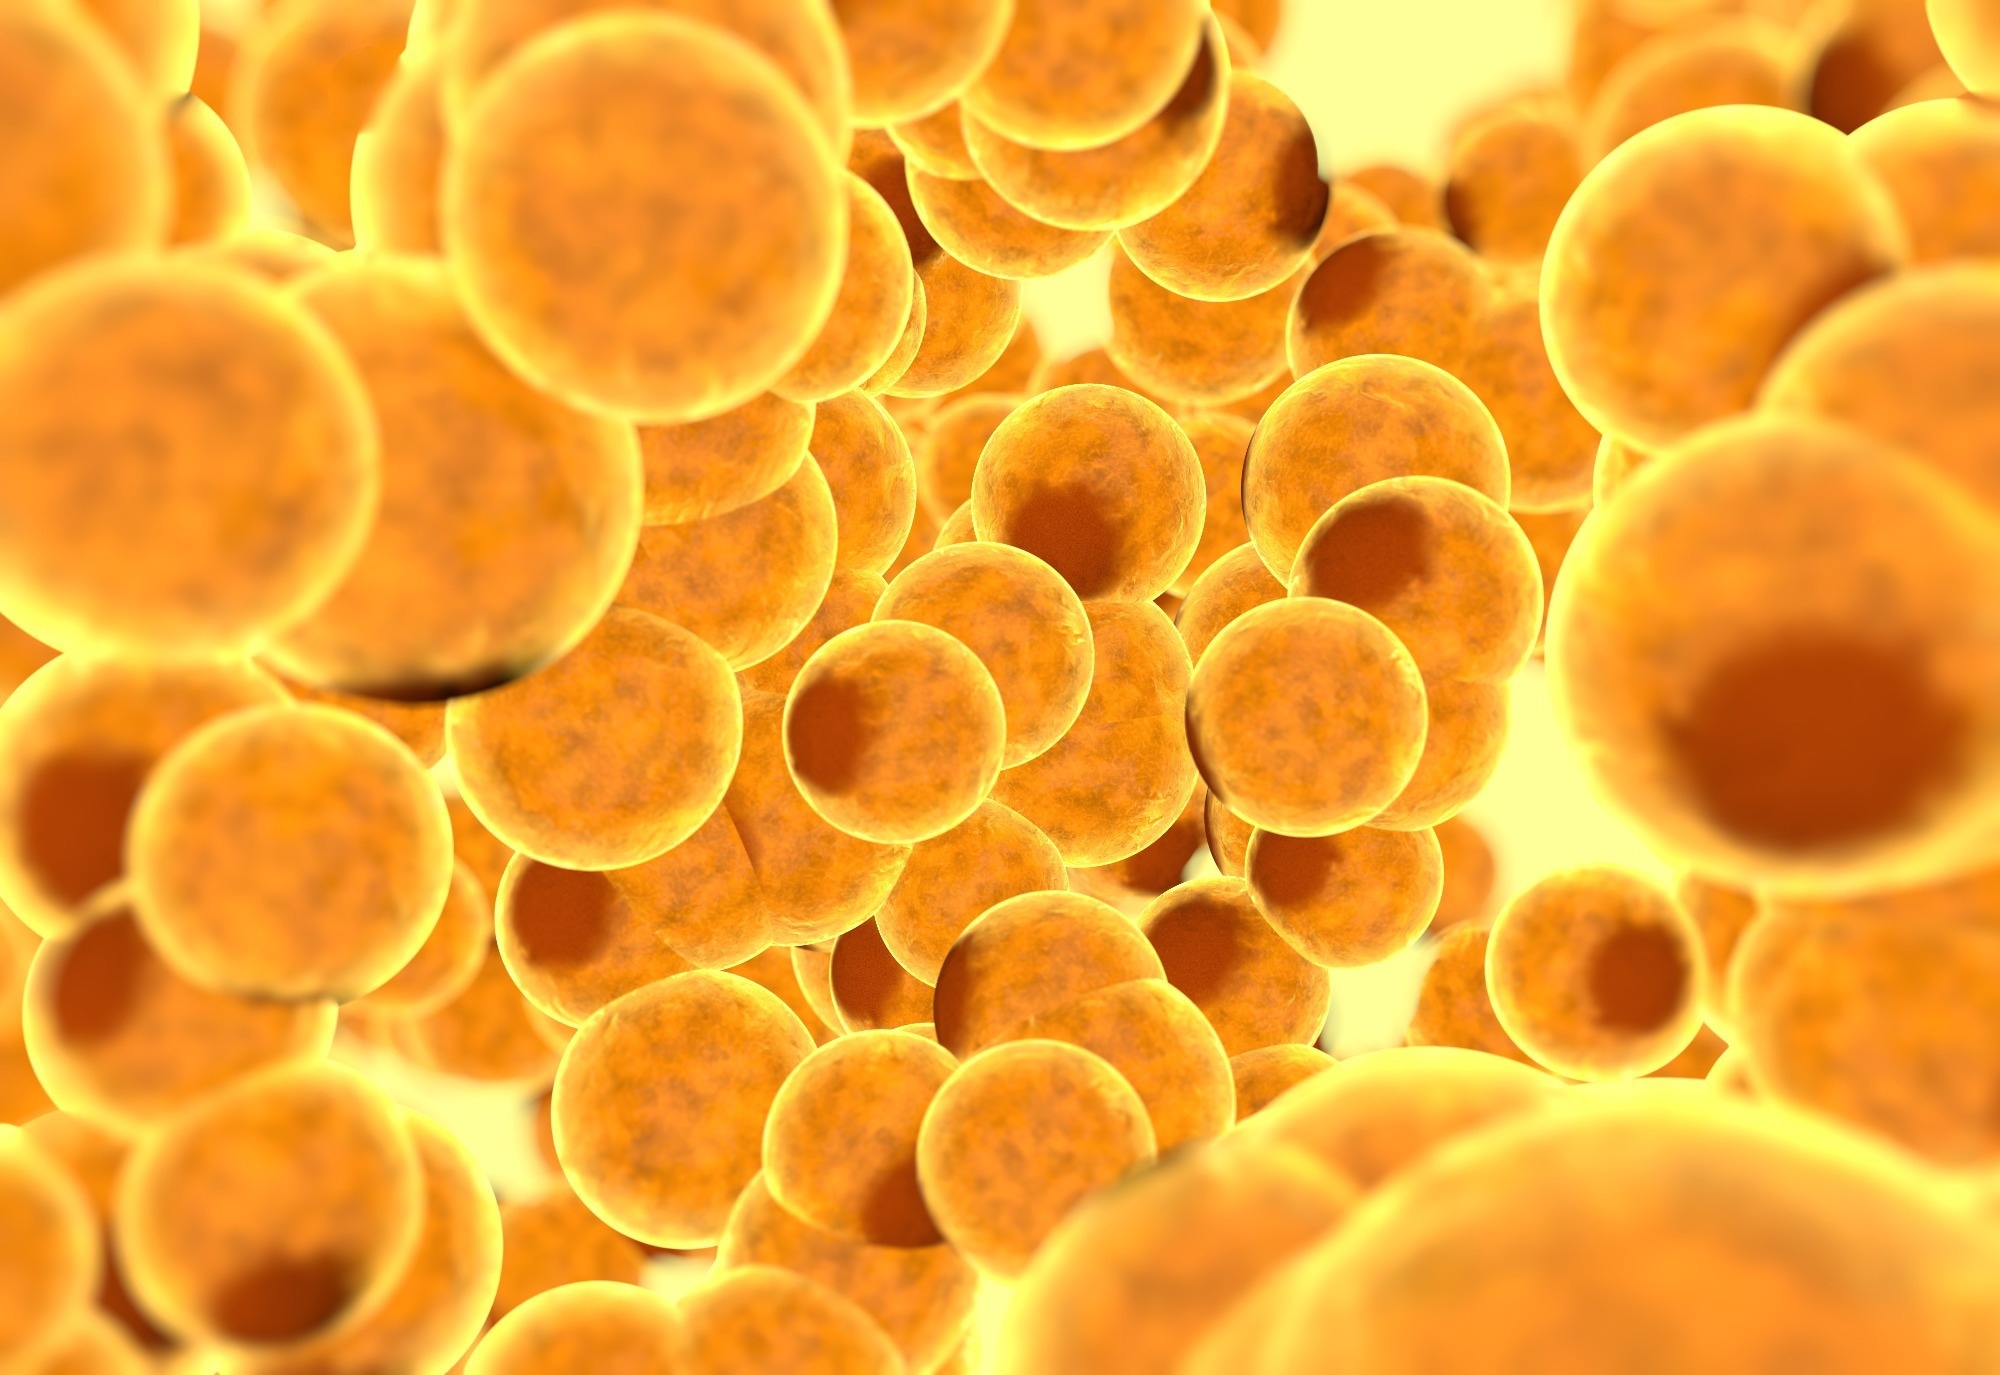 Study: SARS-CoV-2 infection drives an inflammatory response in human adipose tissue through infection of adipocytes and macrophages. Image Credit: Pavel Chagochkin/Shutterstock